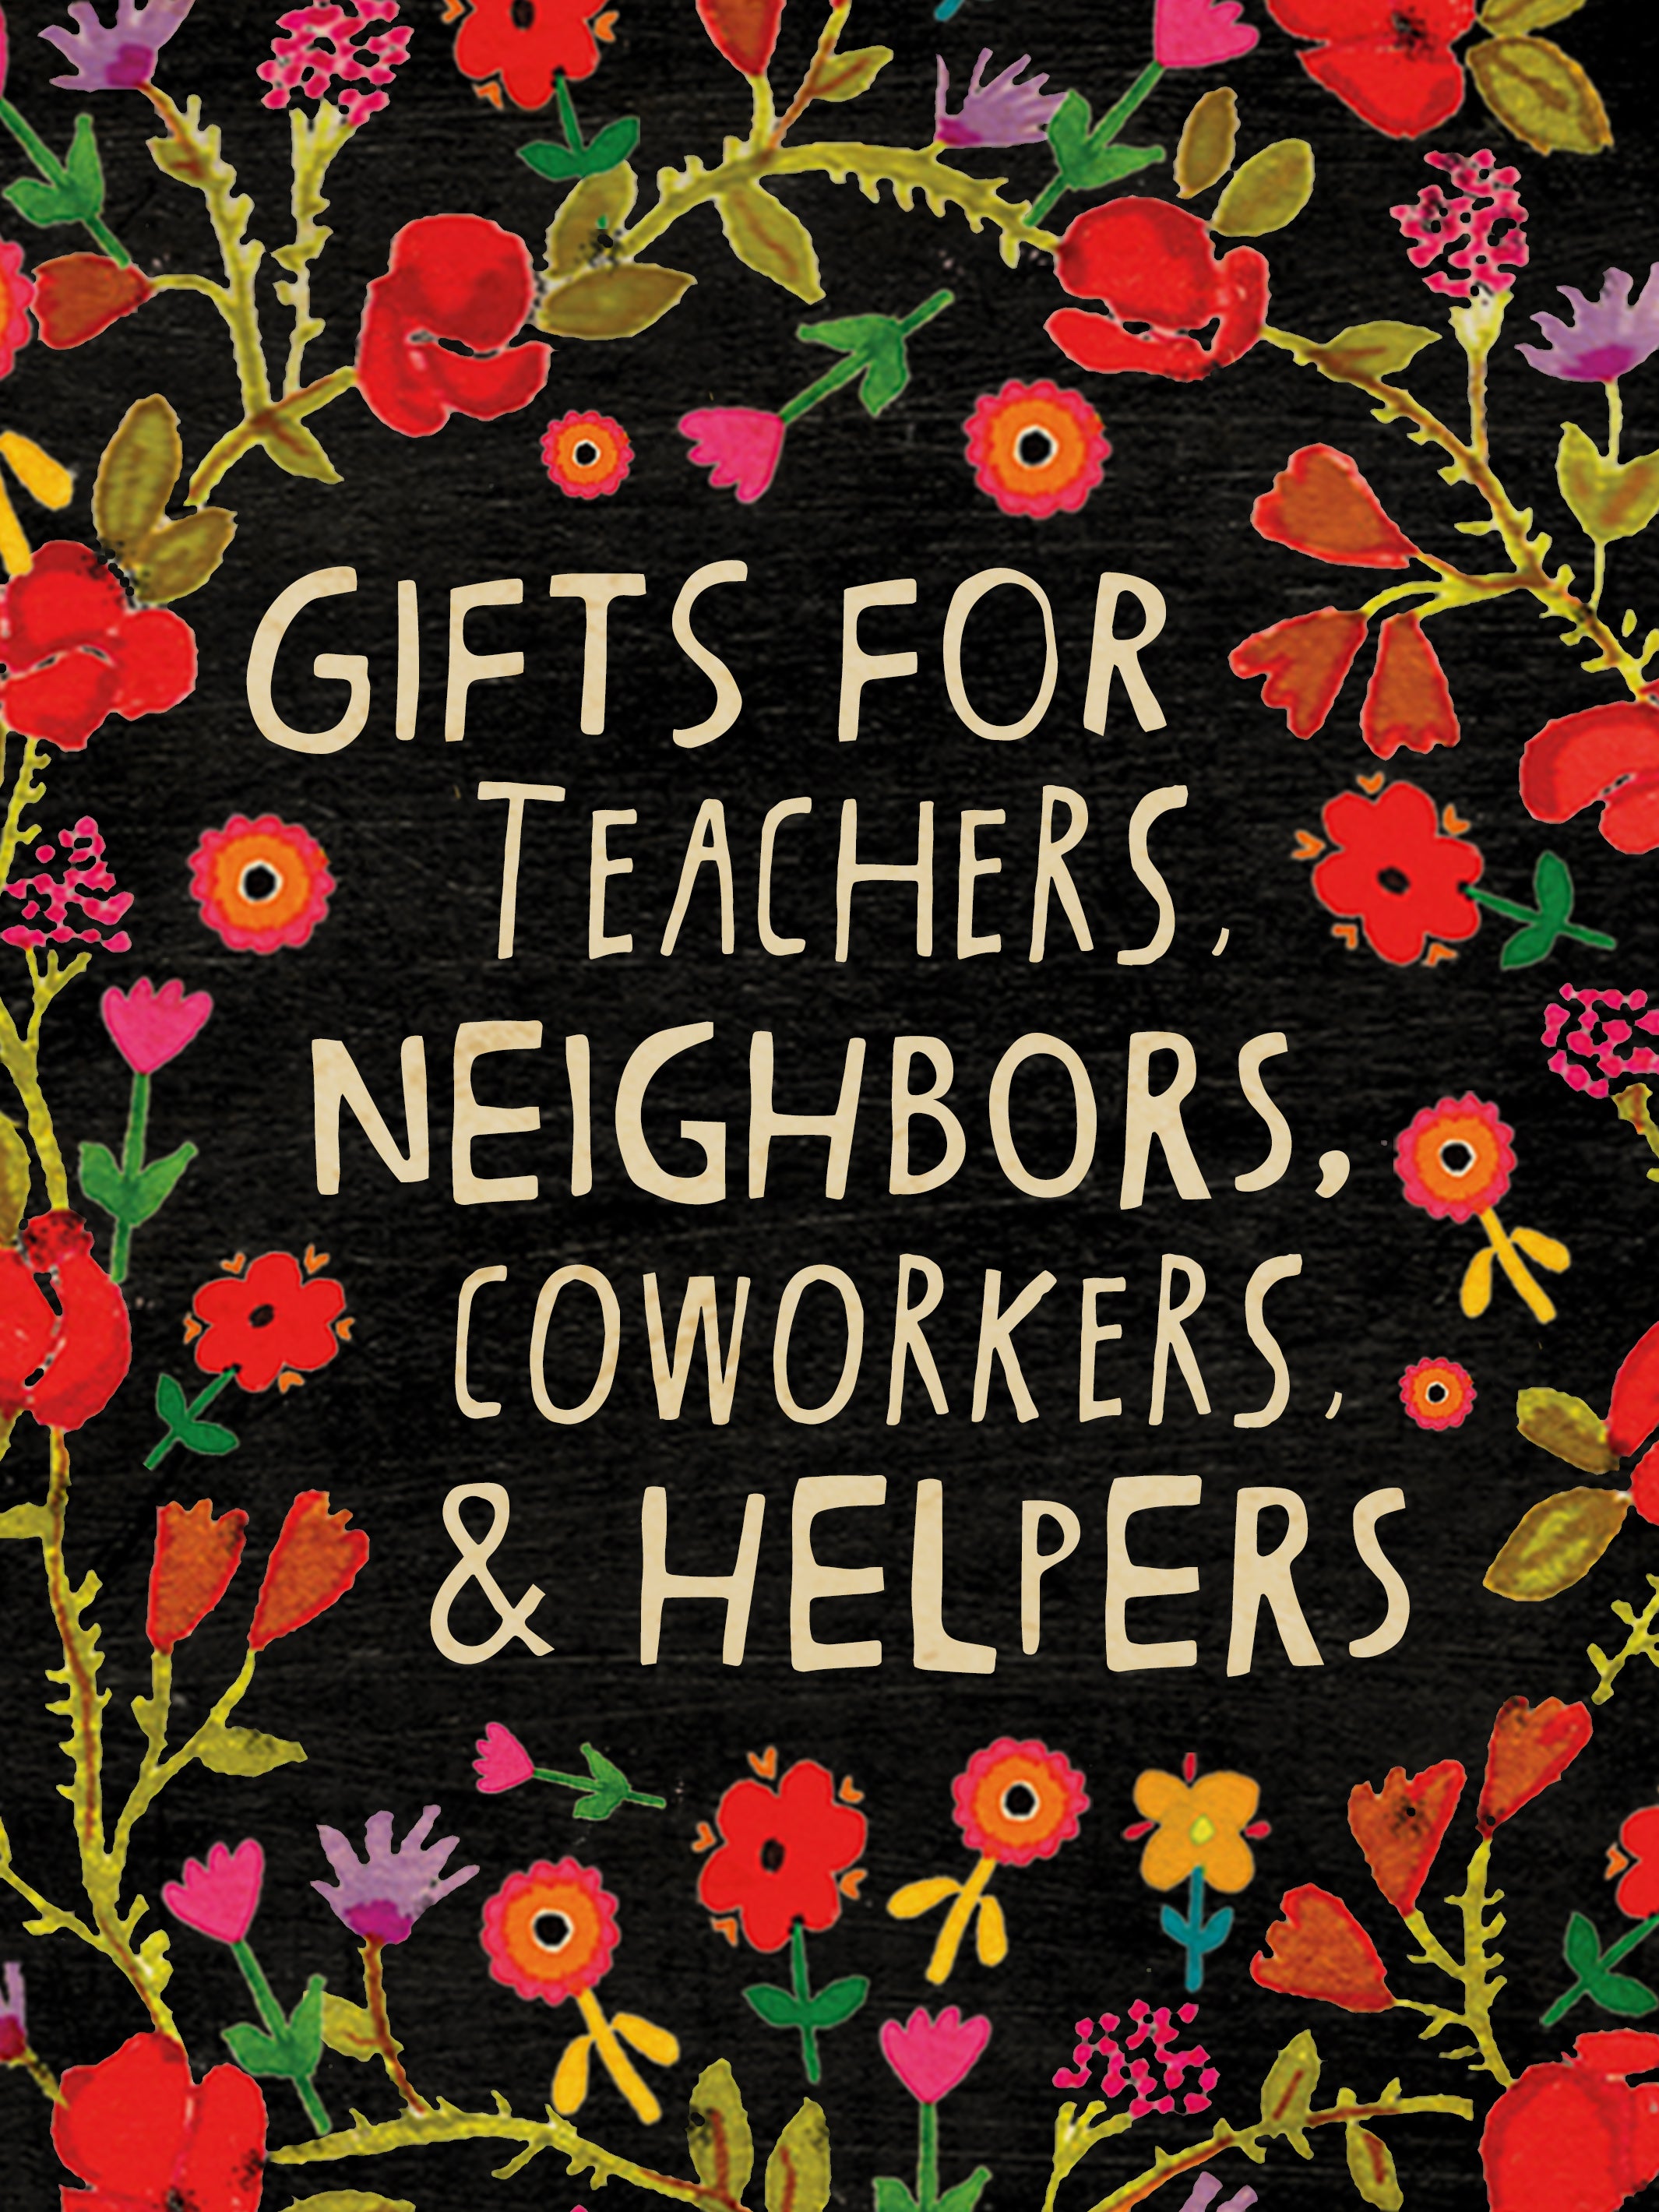 Gifts for Teachers, Neighbors, Coworkers & Helpers